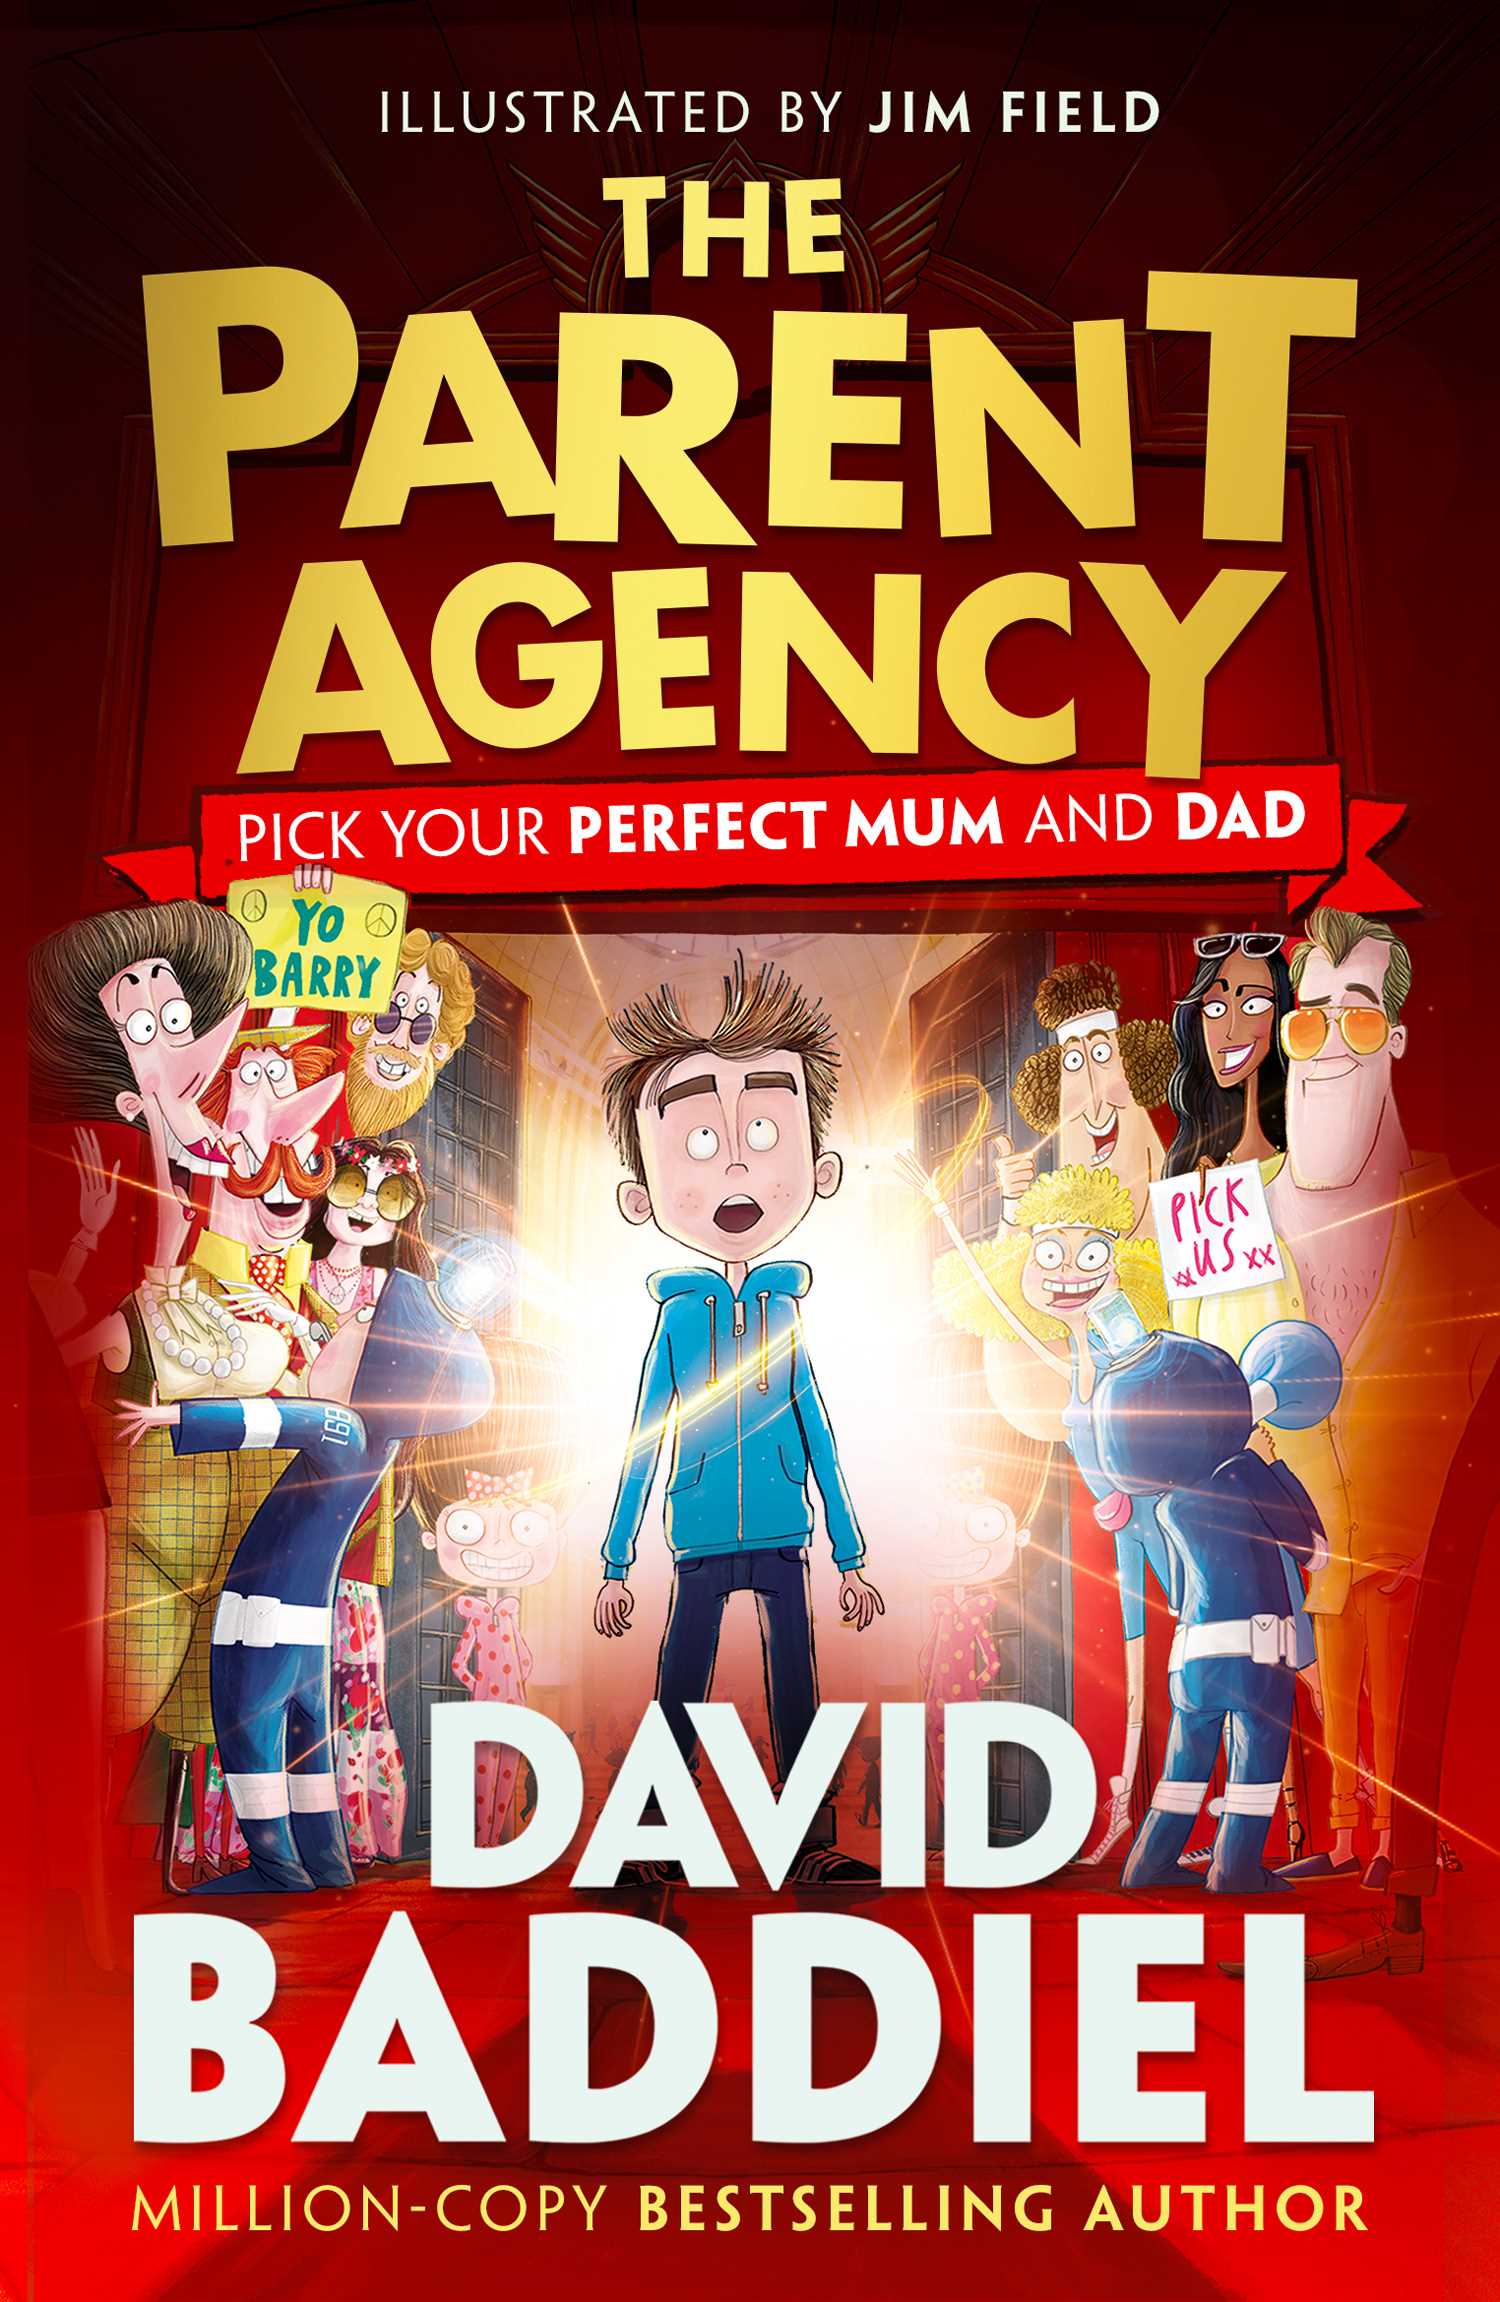 The Parent Agency (10th Anniversary Edition)